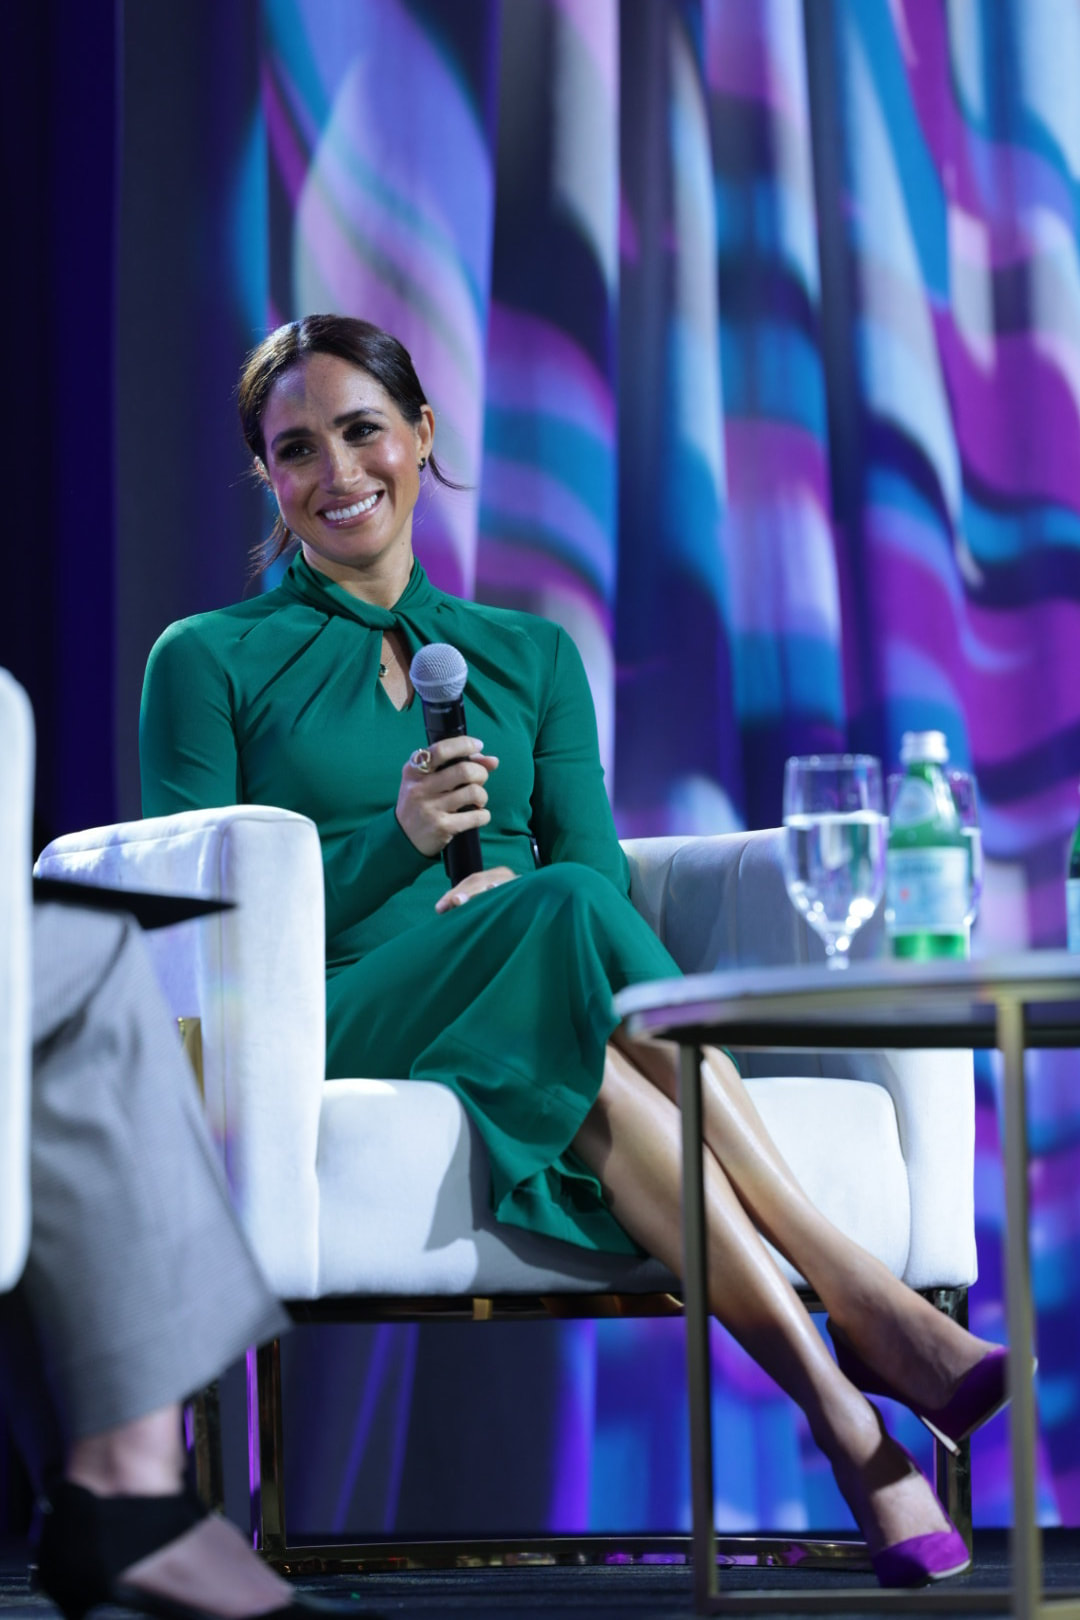 Meghan Markle Duchess of Sussex attended the Women’s Fund of Central Indiana to take part in a discussion focused on women's empowerment and supporting young girls with Rabbi Sandy Sasso.